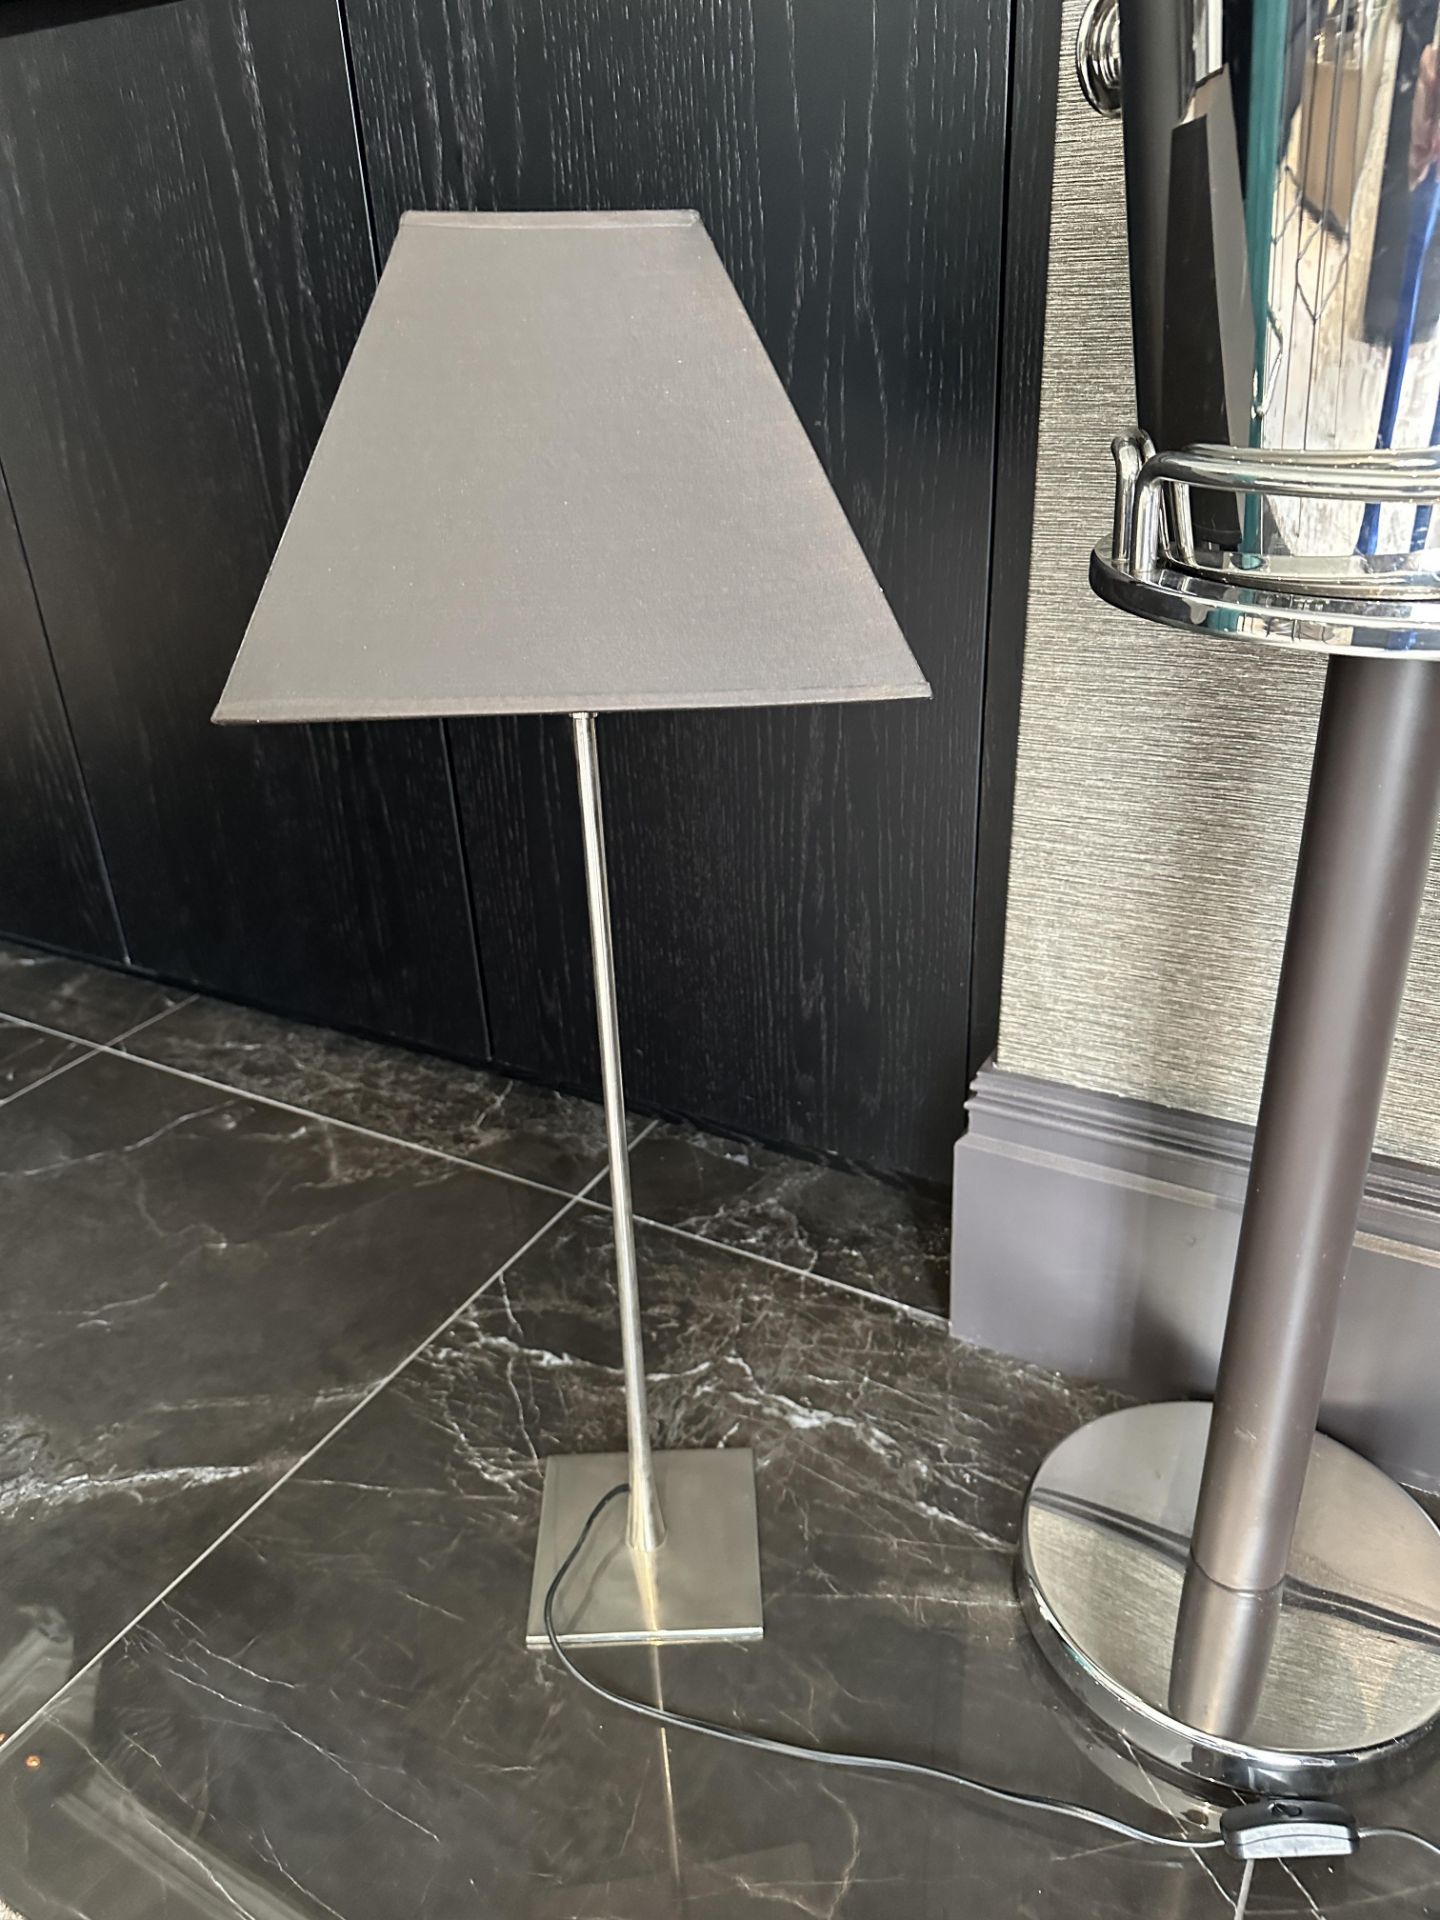 2 x Stainless Steel Lamps With Lamp Shade Wired With Side Switch - Image 6 of 10